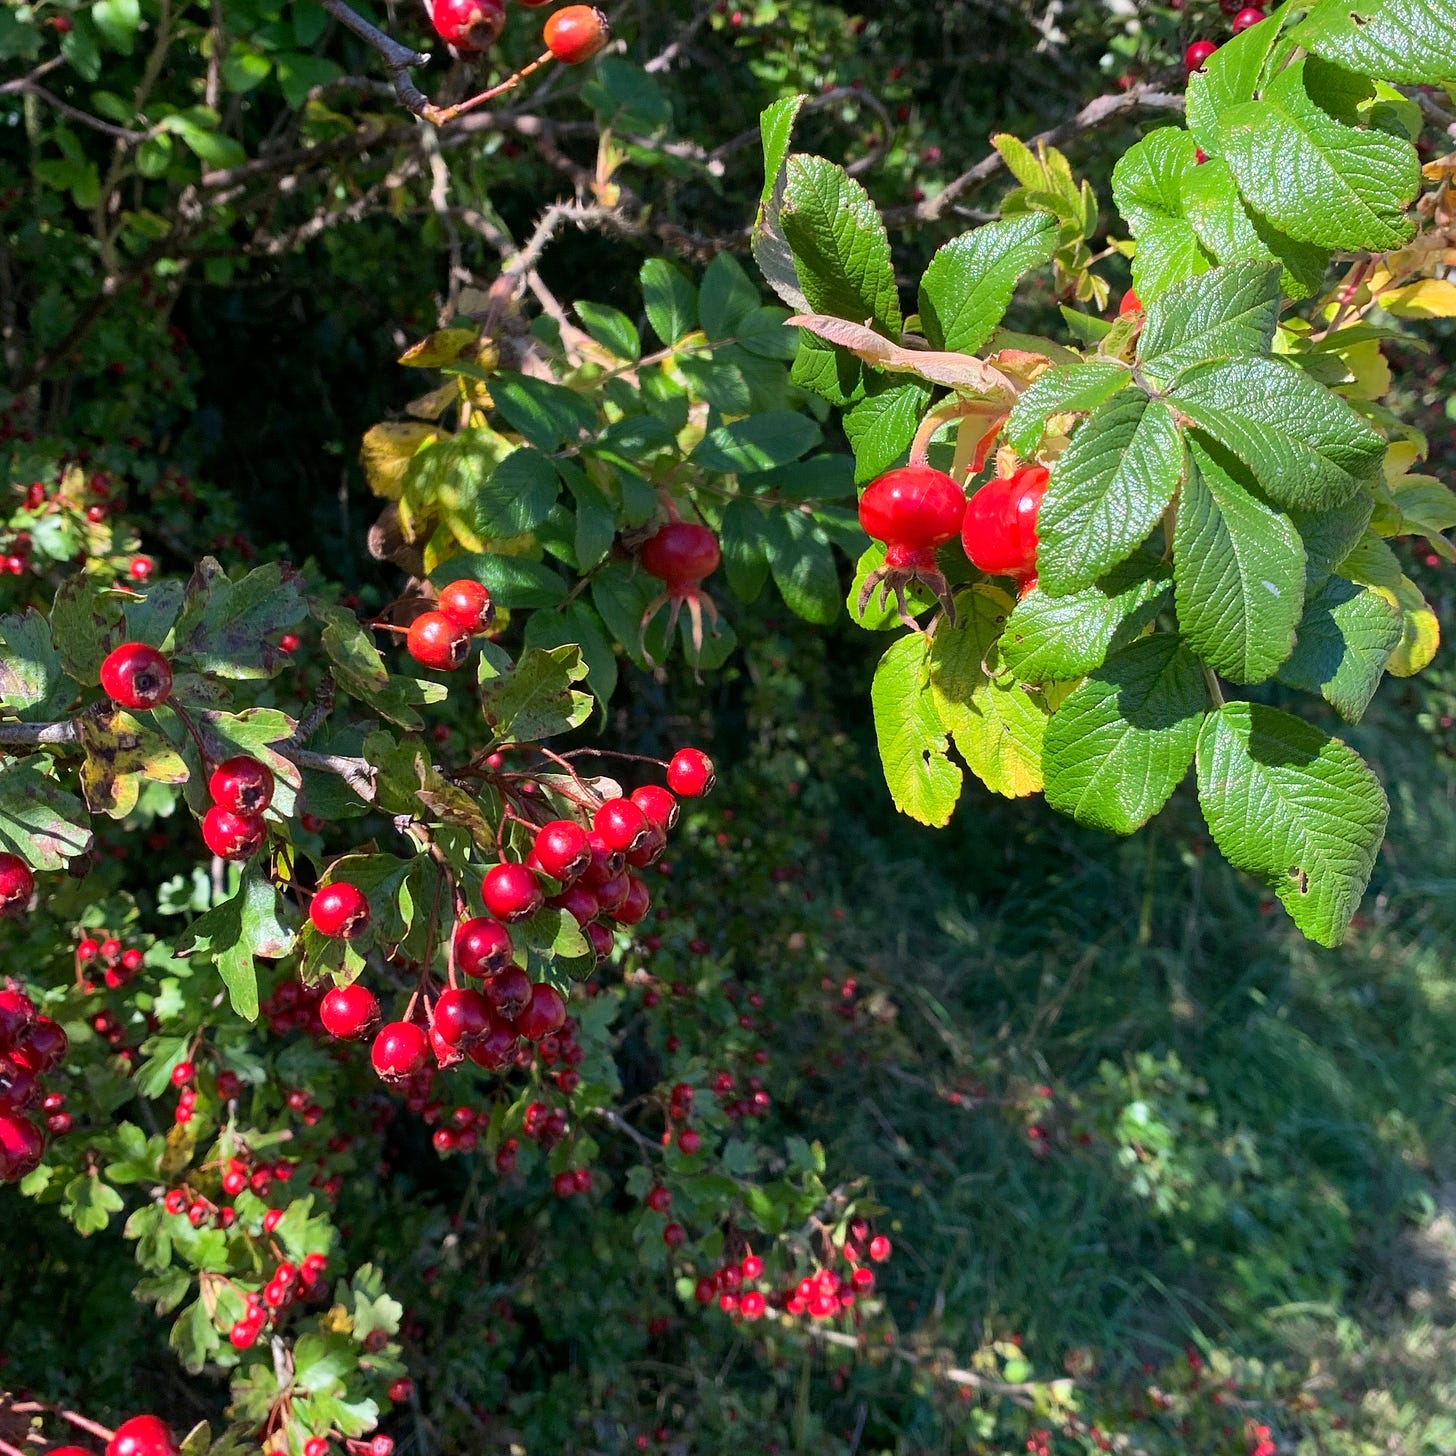 Glossy red hips and haws.